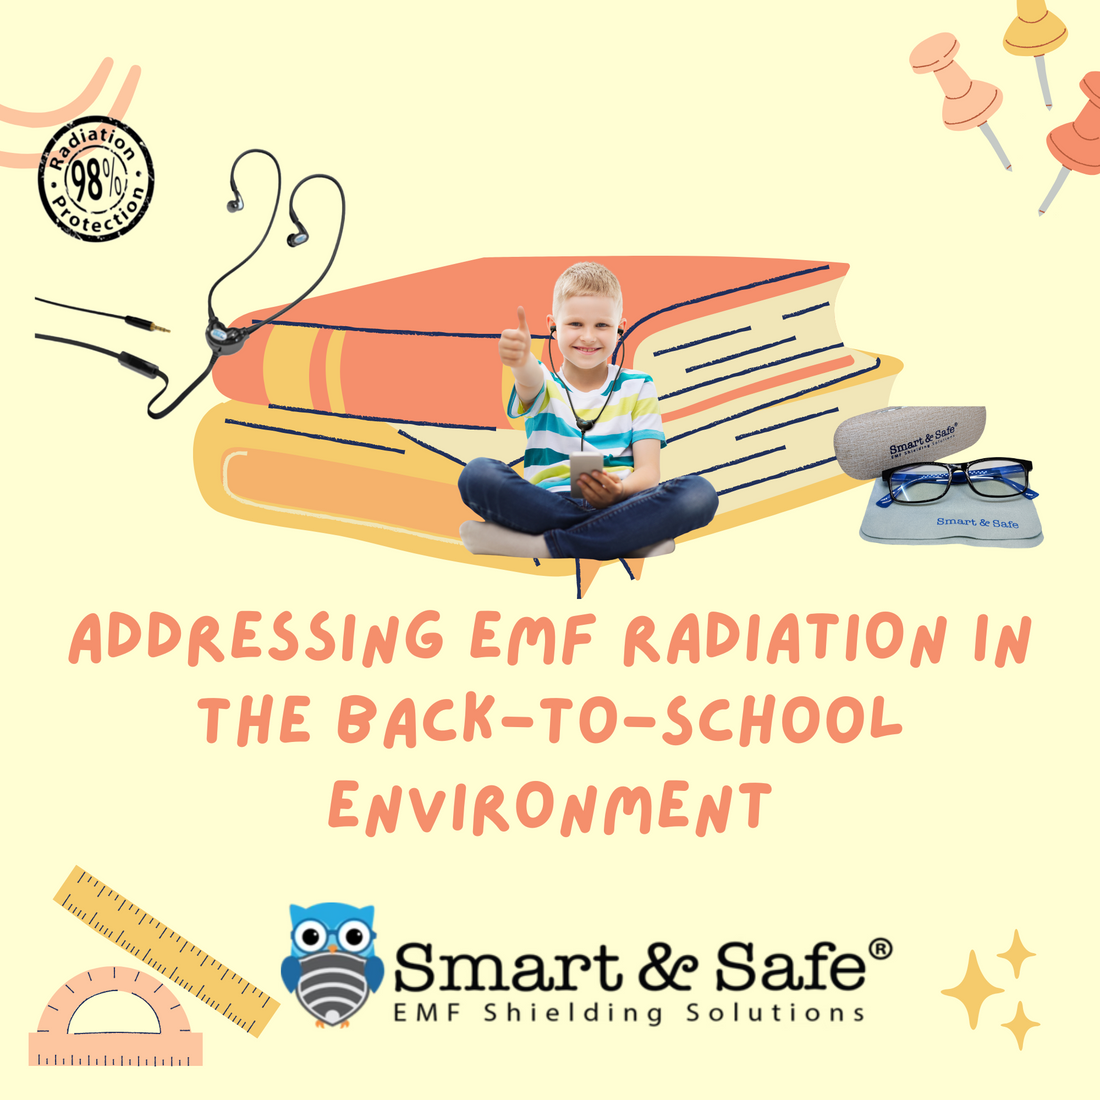 Promoting Health and Well-being in the Back-to-School Environment by Addressing EMF Radiation